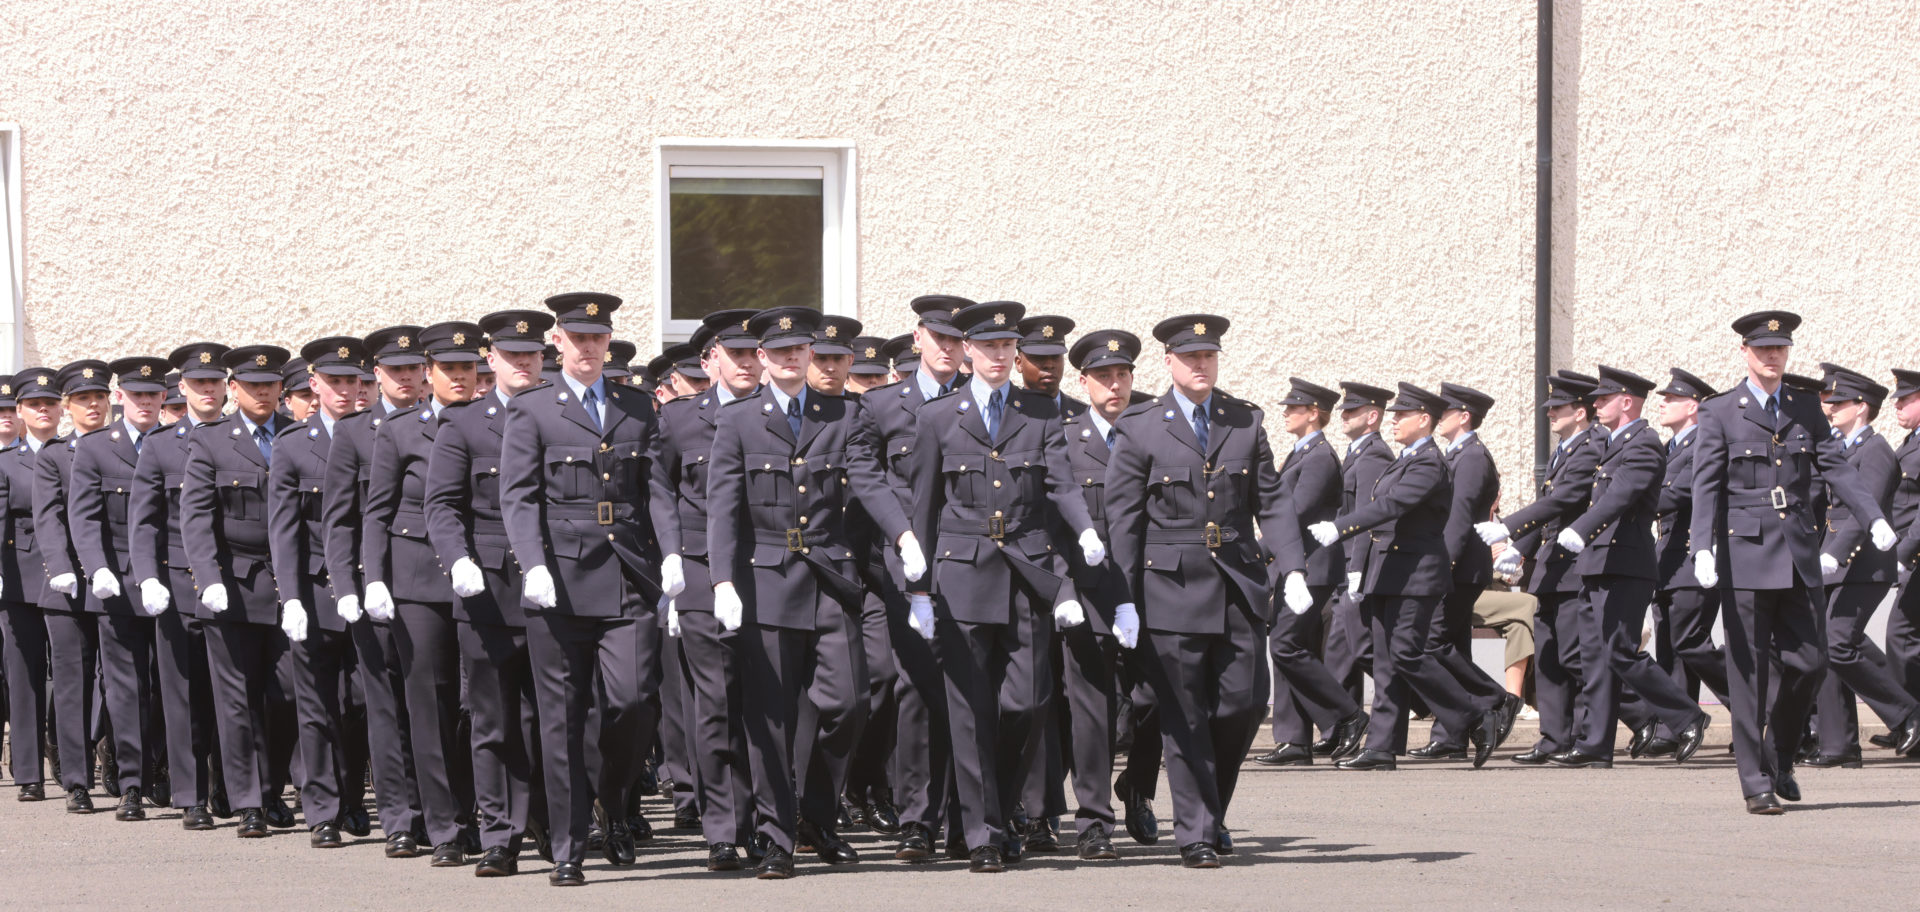 19/5/2022. Garda Passing Out Parade, Templemore. New Garda recruits on parade at the Garda Training College in Templemore. Photo: Eamonn Farrell/RollingNews.ie